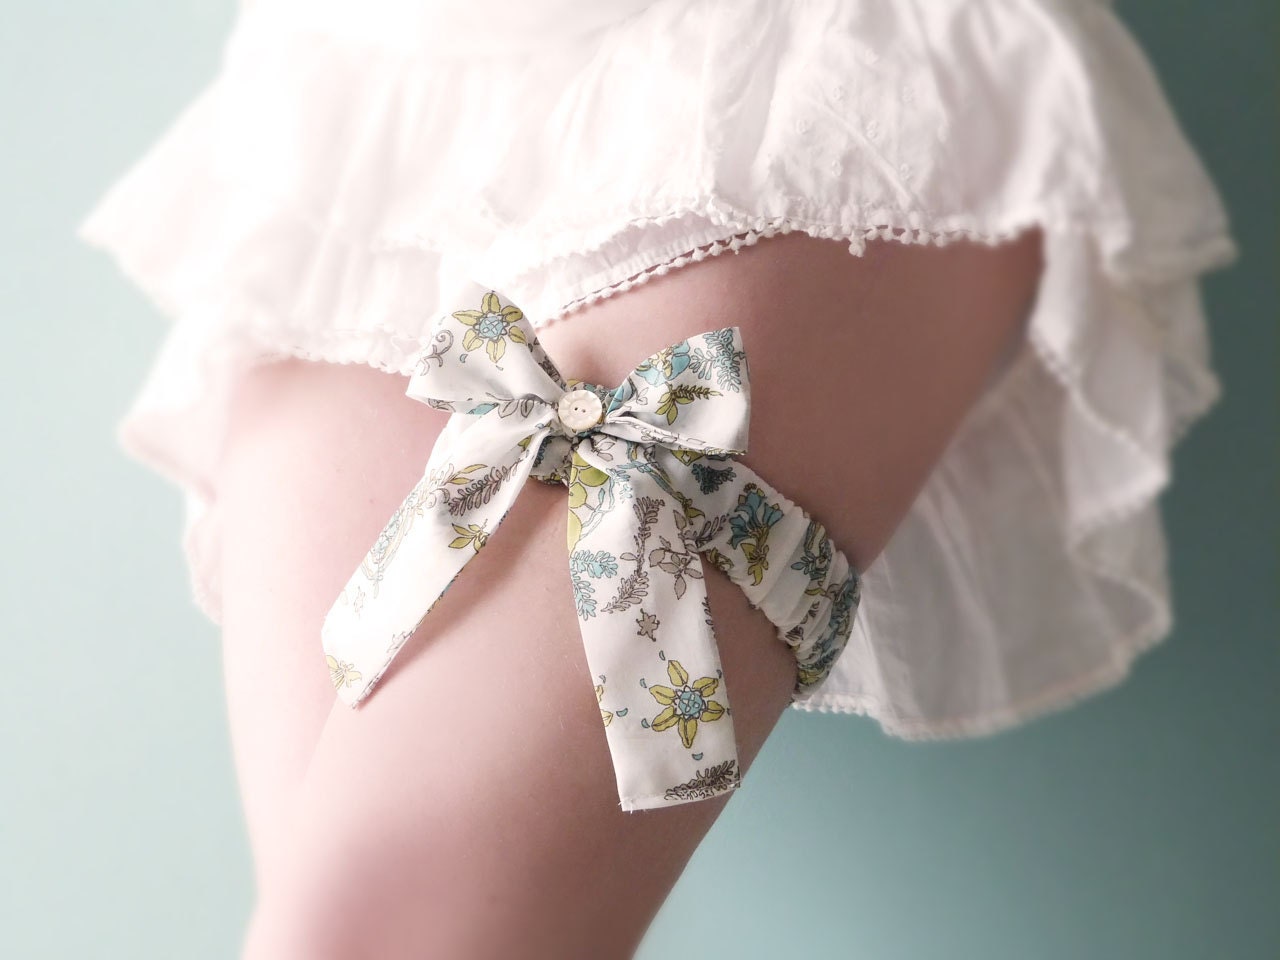 Bridal garter Romantic floral cotton French lingerie OOAK by Jye, Hand-made in France - Joliejye